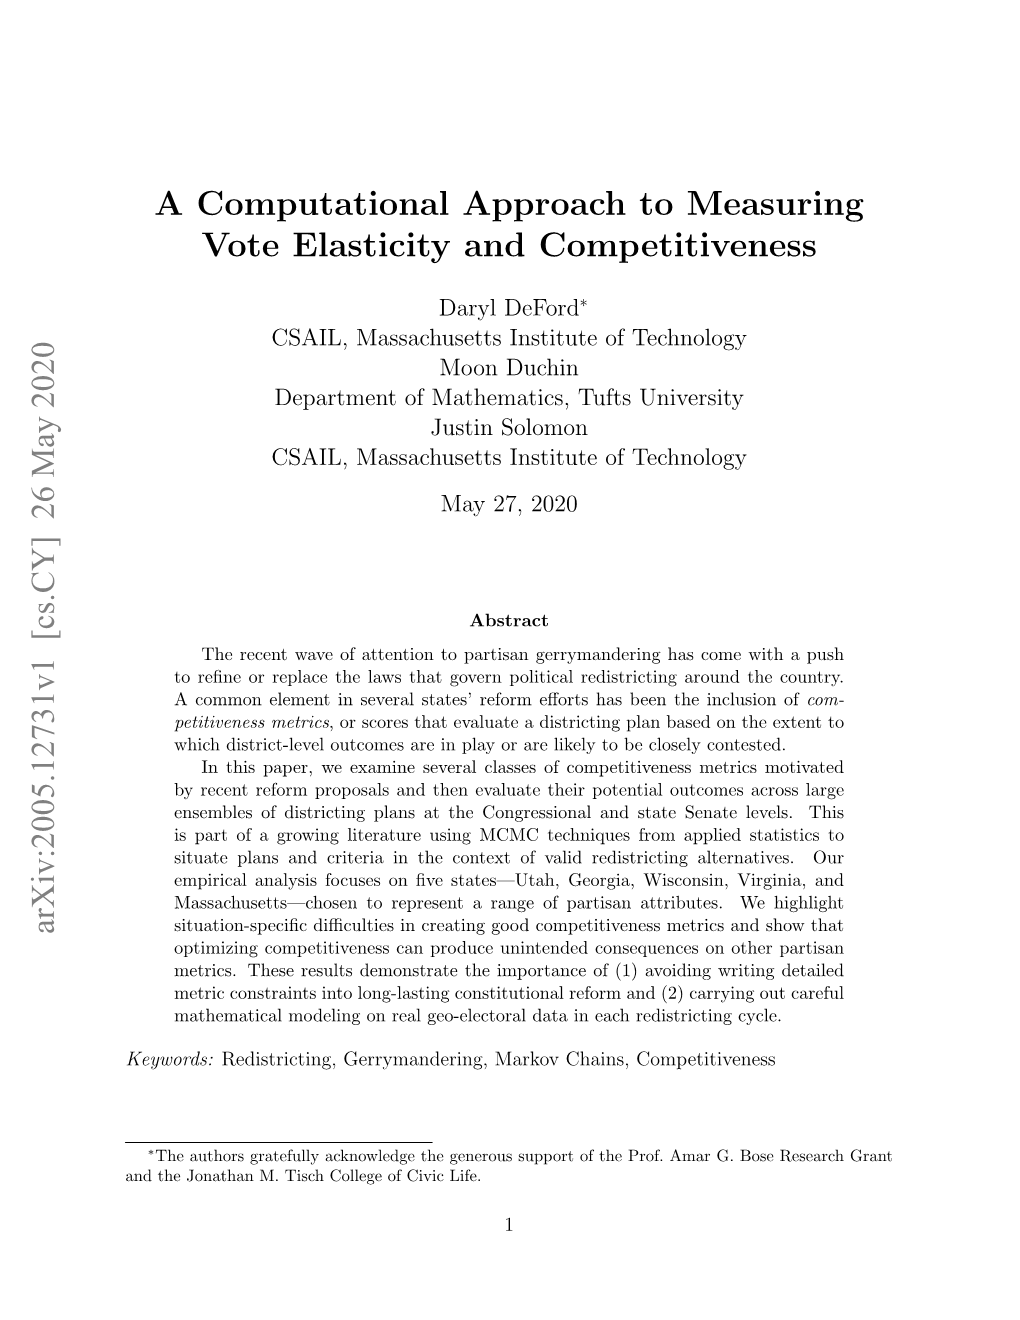 A Computational Approach to Measuring Vote Elasticity and Competitiveness